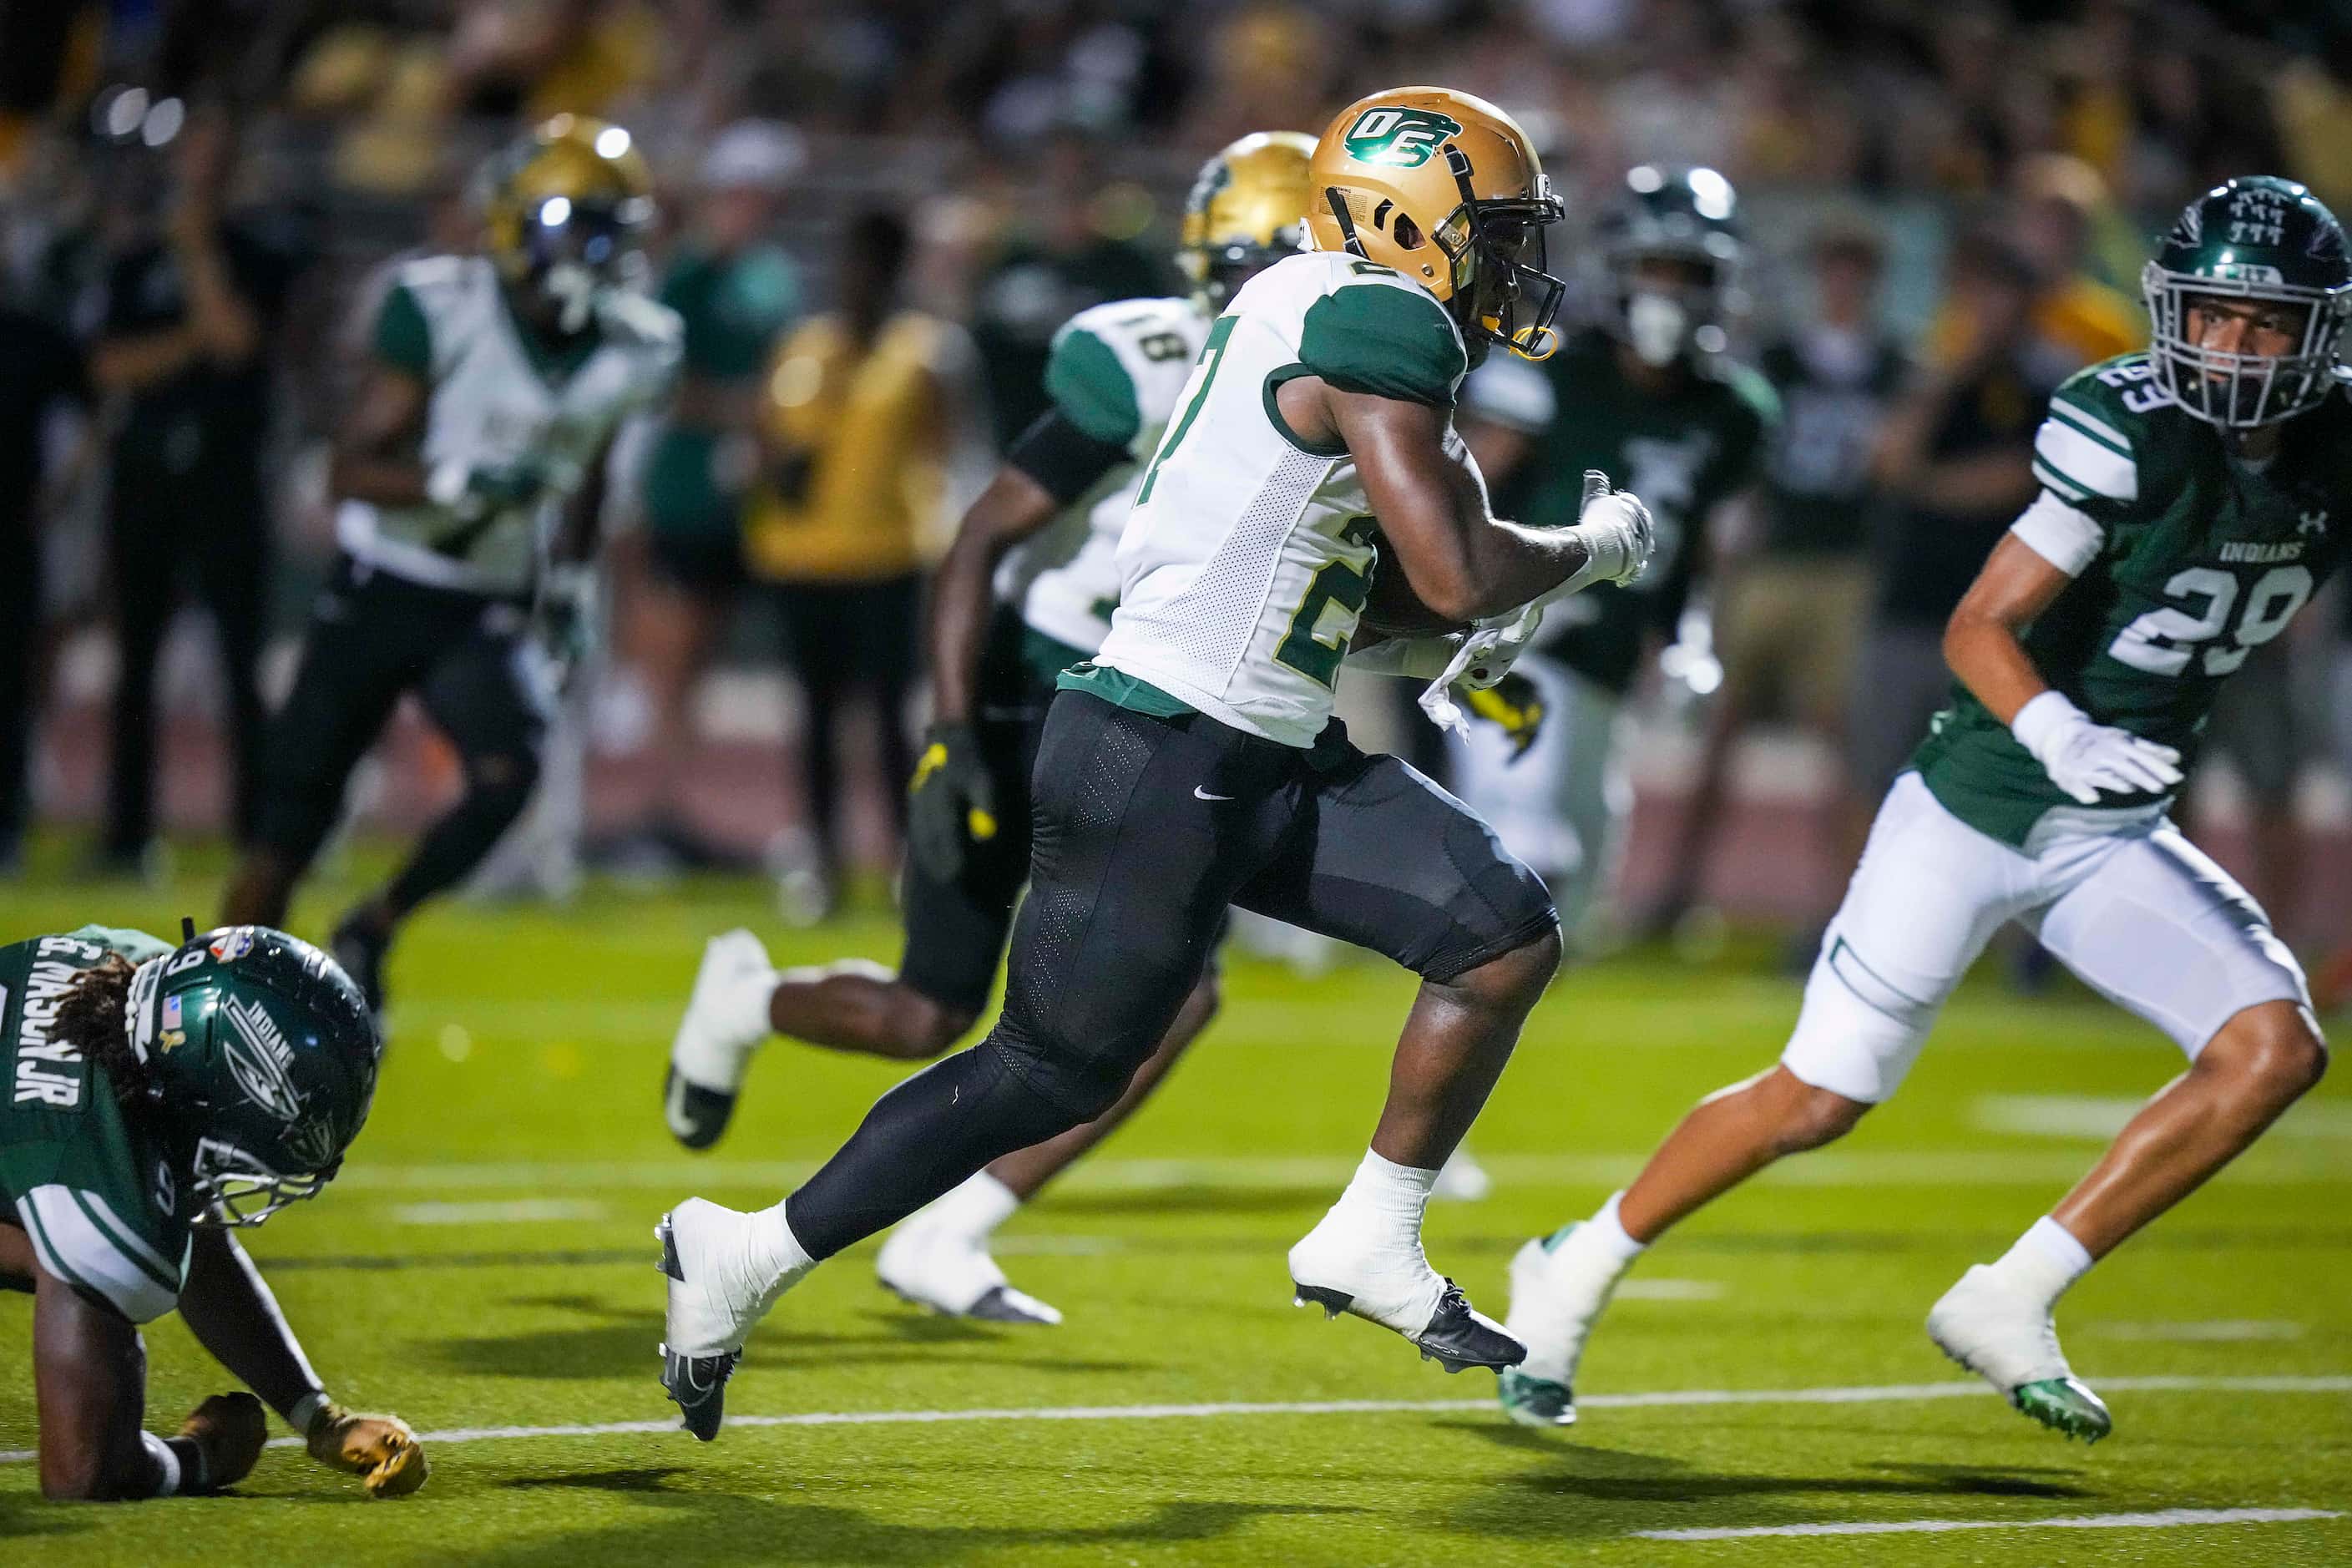 DeSoto  running back Marvin Duffey (27) races through the Waxahachie defense on a 14-yard...